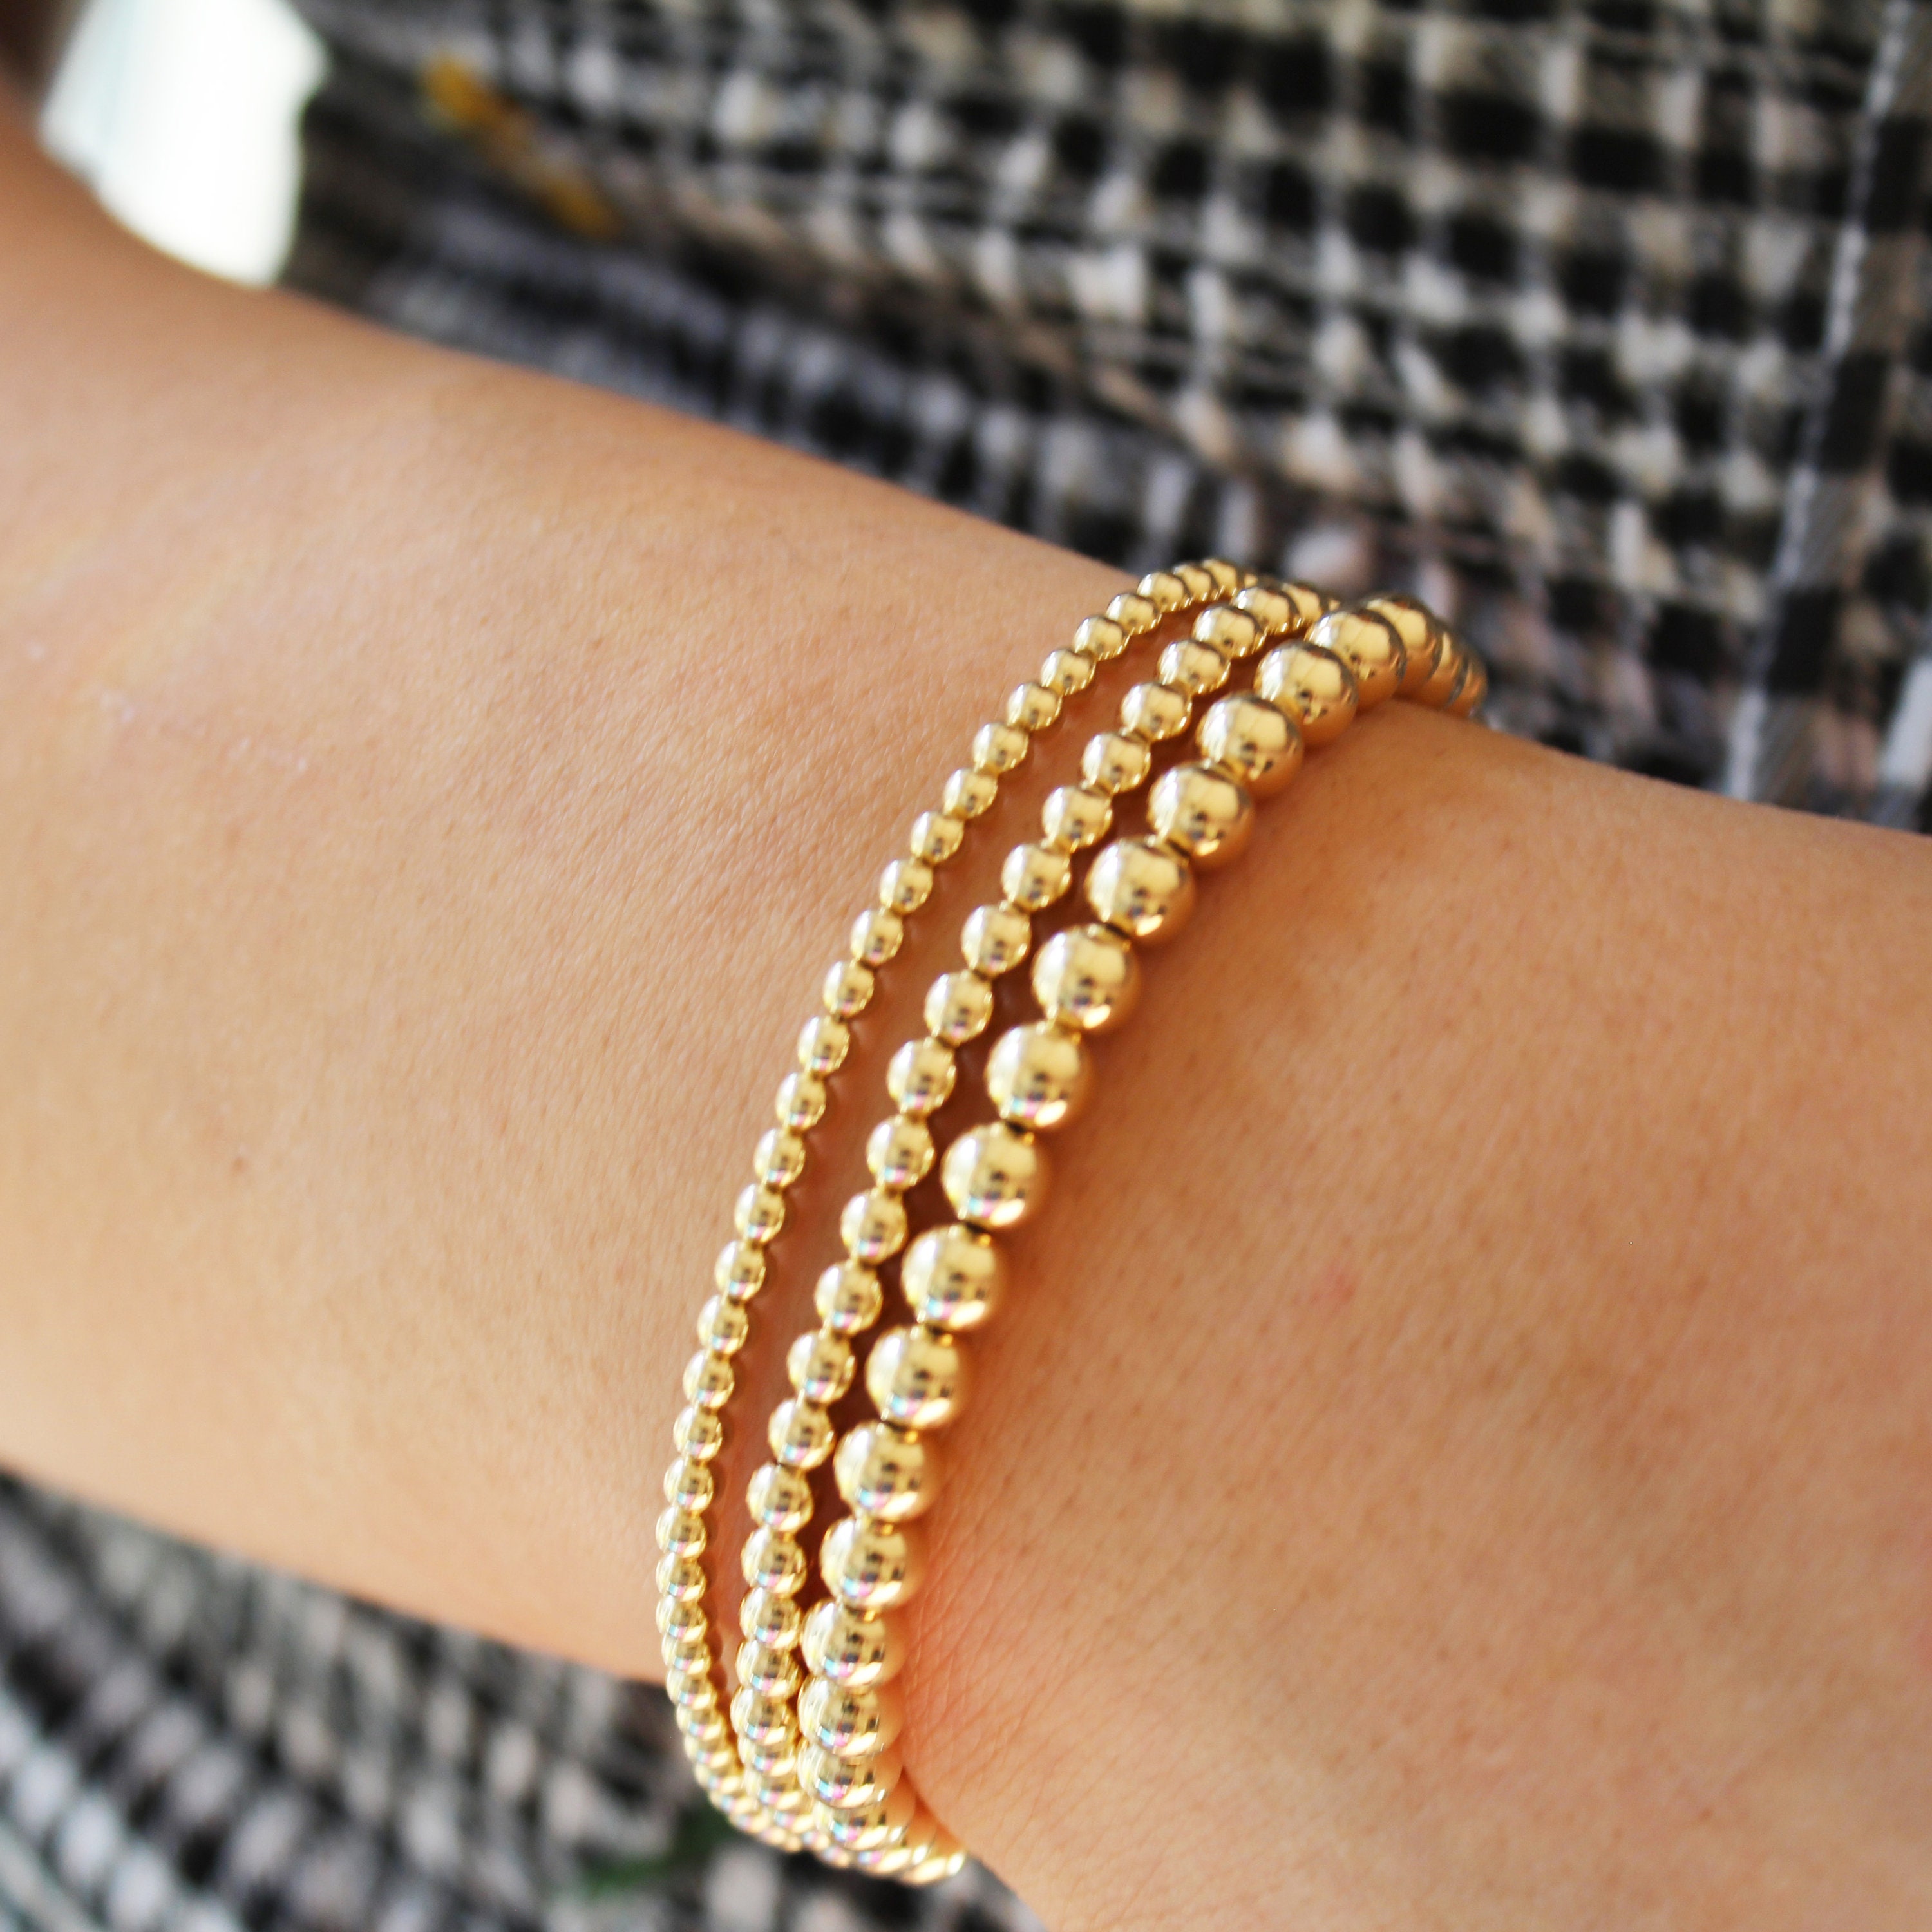 Build Your Own Gold & Rose Charm Bracelet | Handmade Jewelry | Cara O Sello Pearl